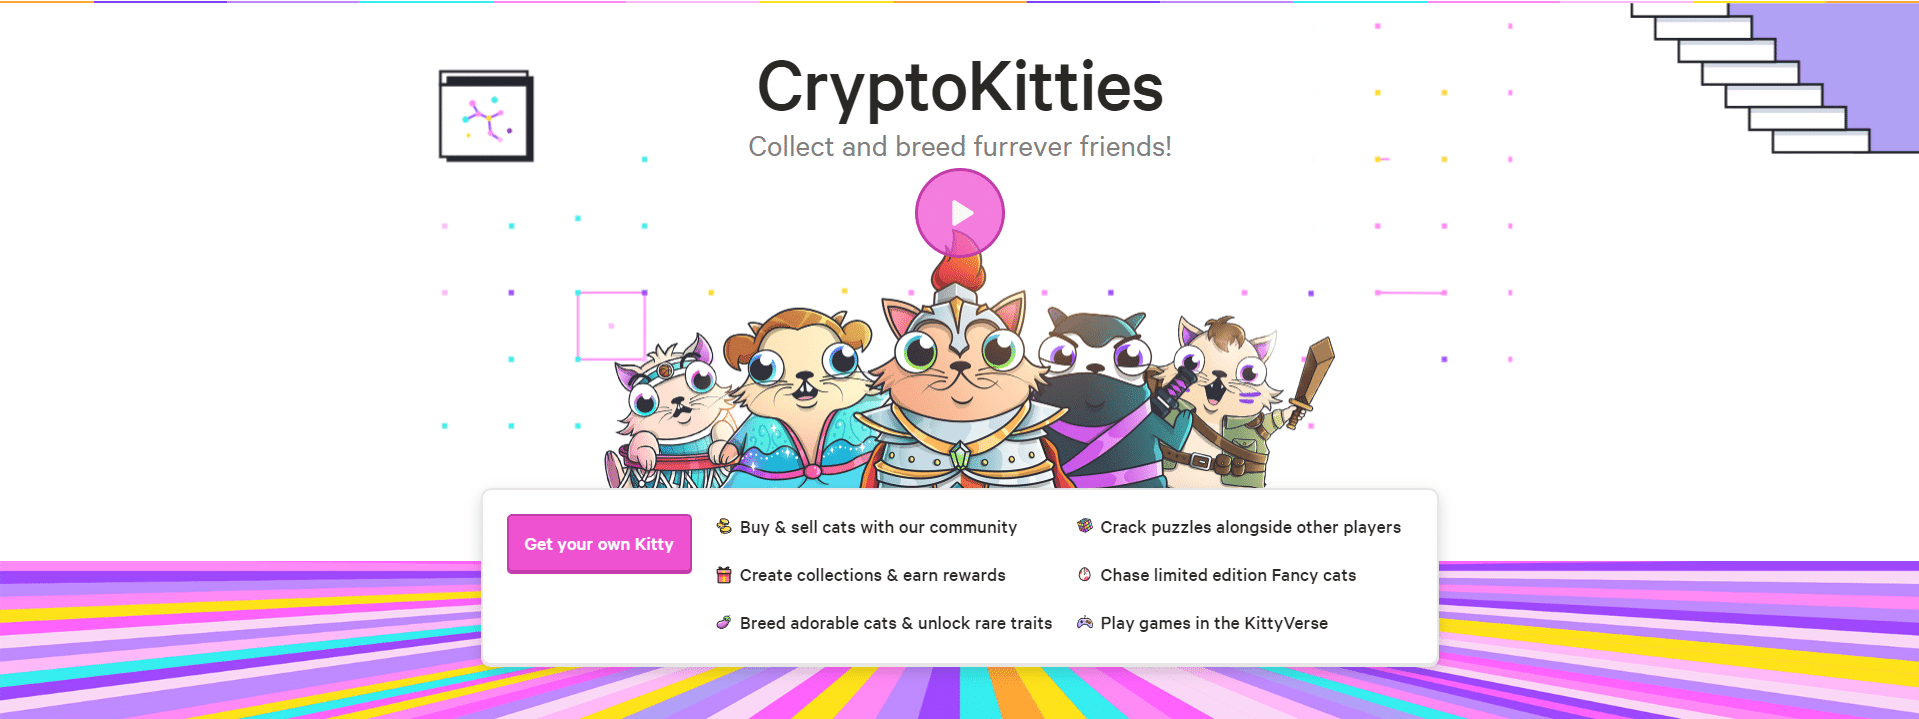 CryptoKitties — One of the first P2E crypto games that allow you to breed and trade digital kittens